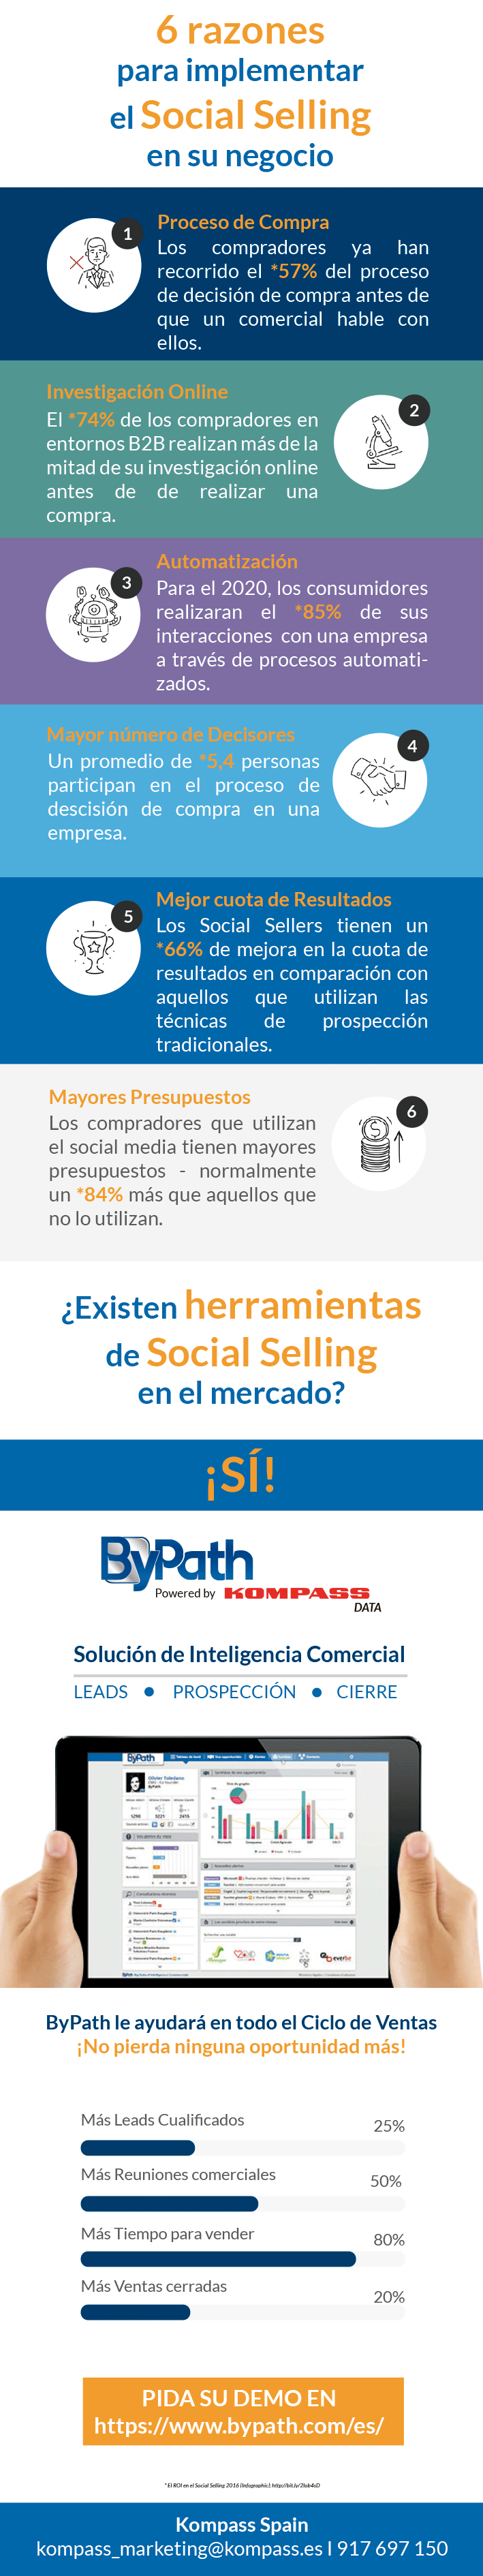 ByPath - Social Selling